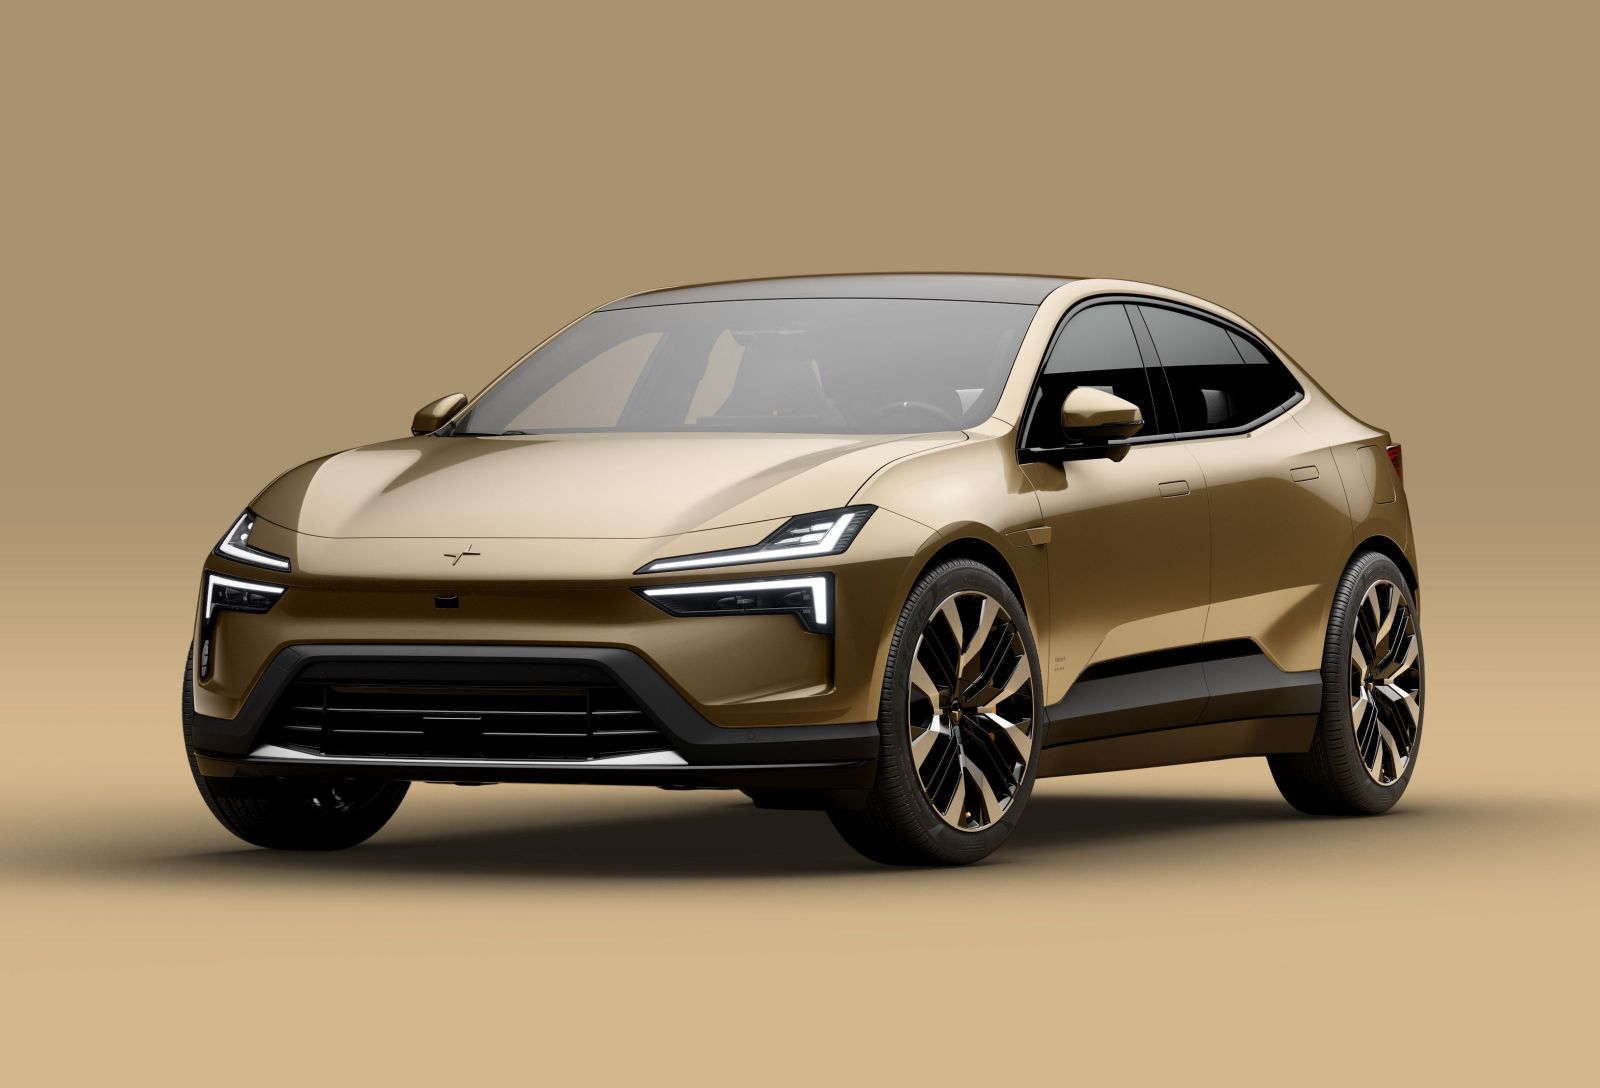 News - Polestar 4: The Future of Sustainable Electric Performance Cars?